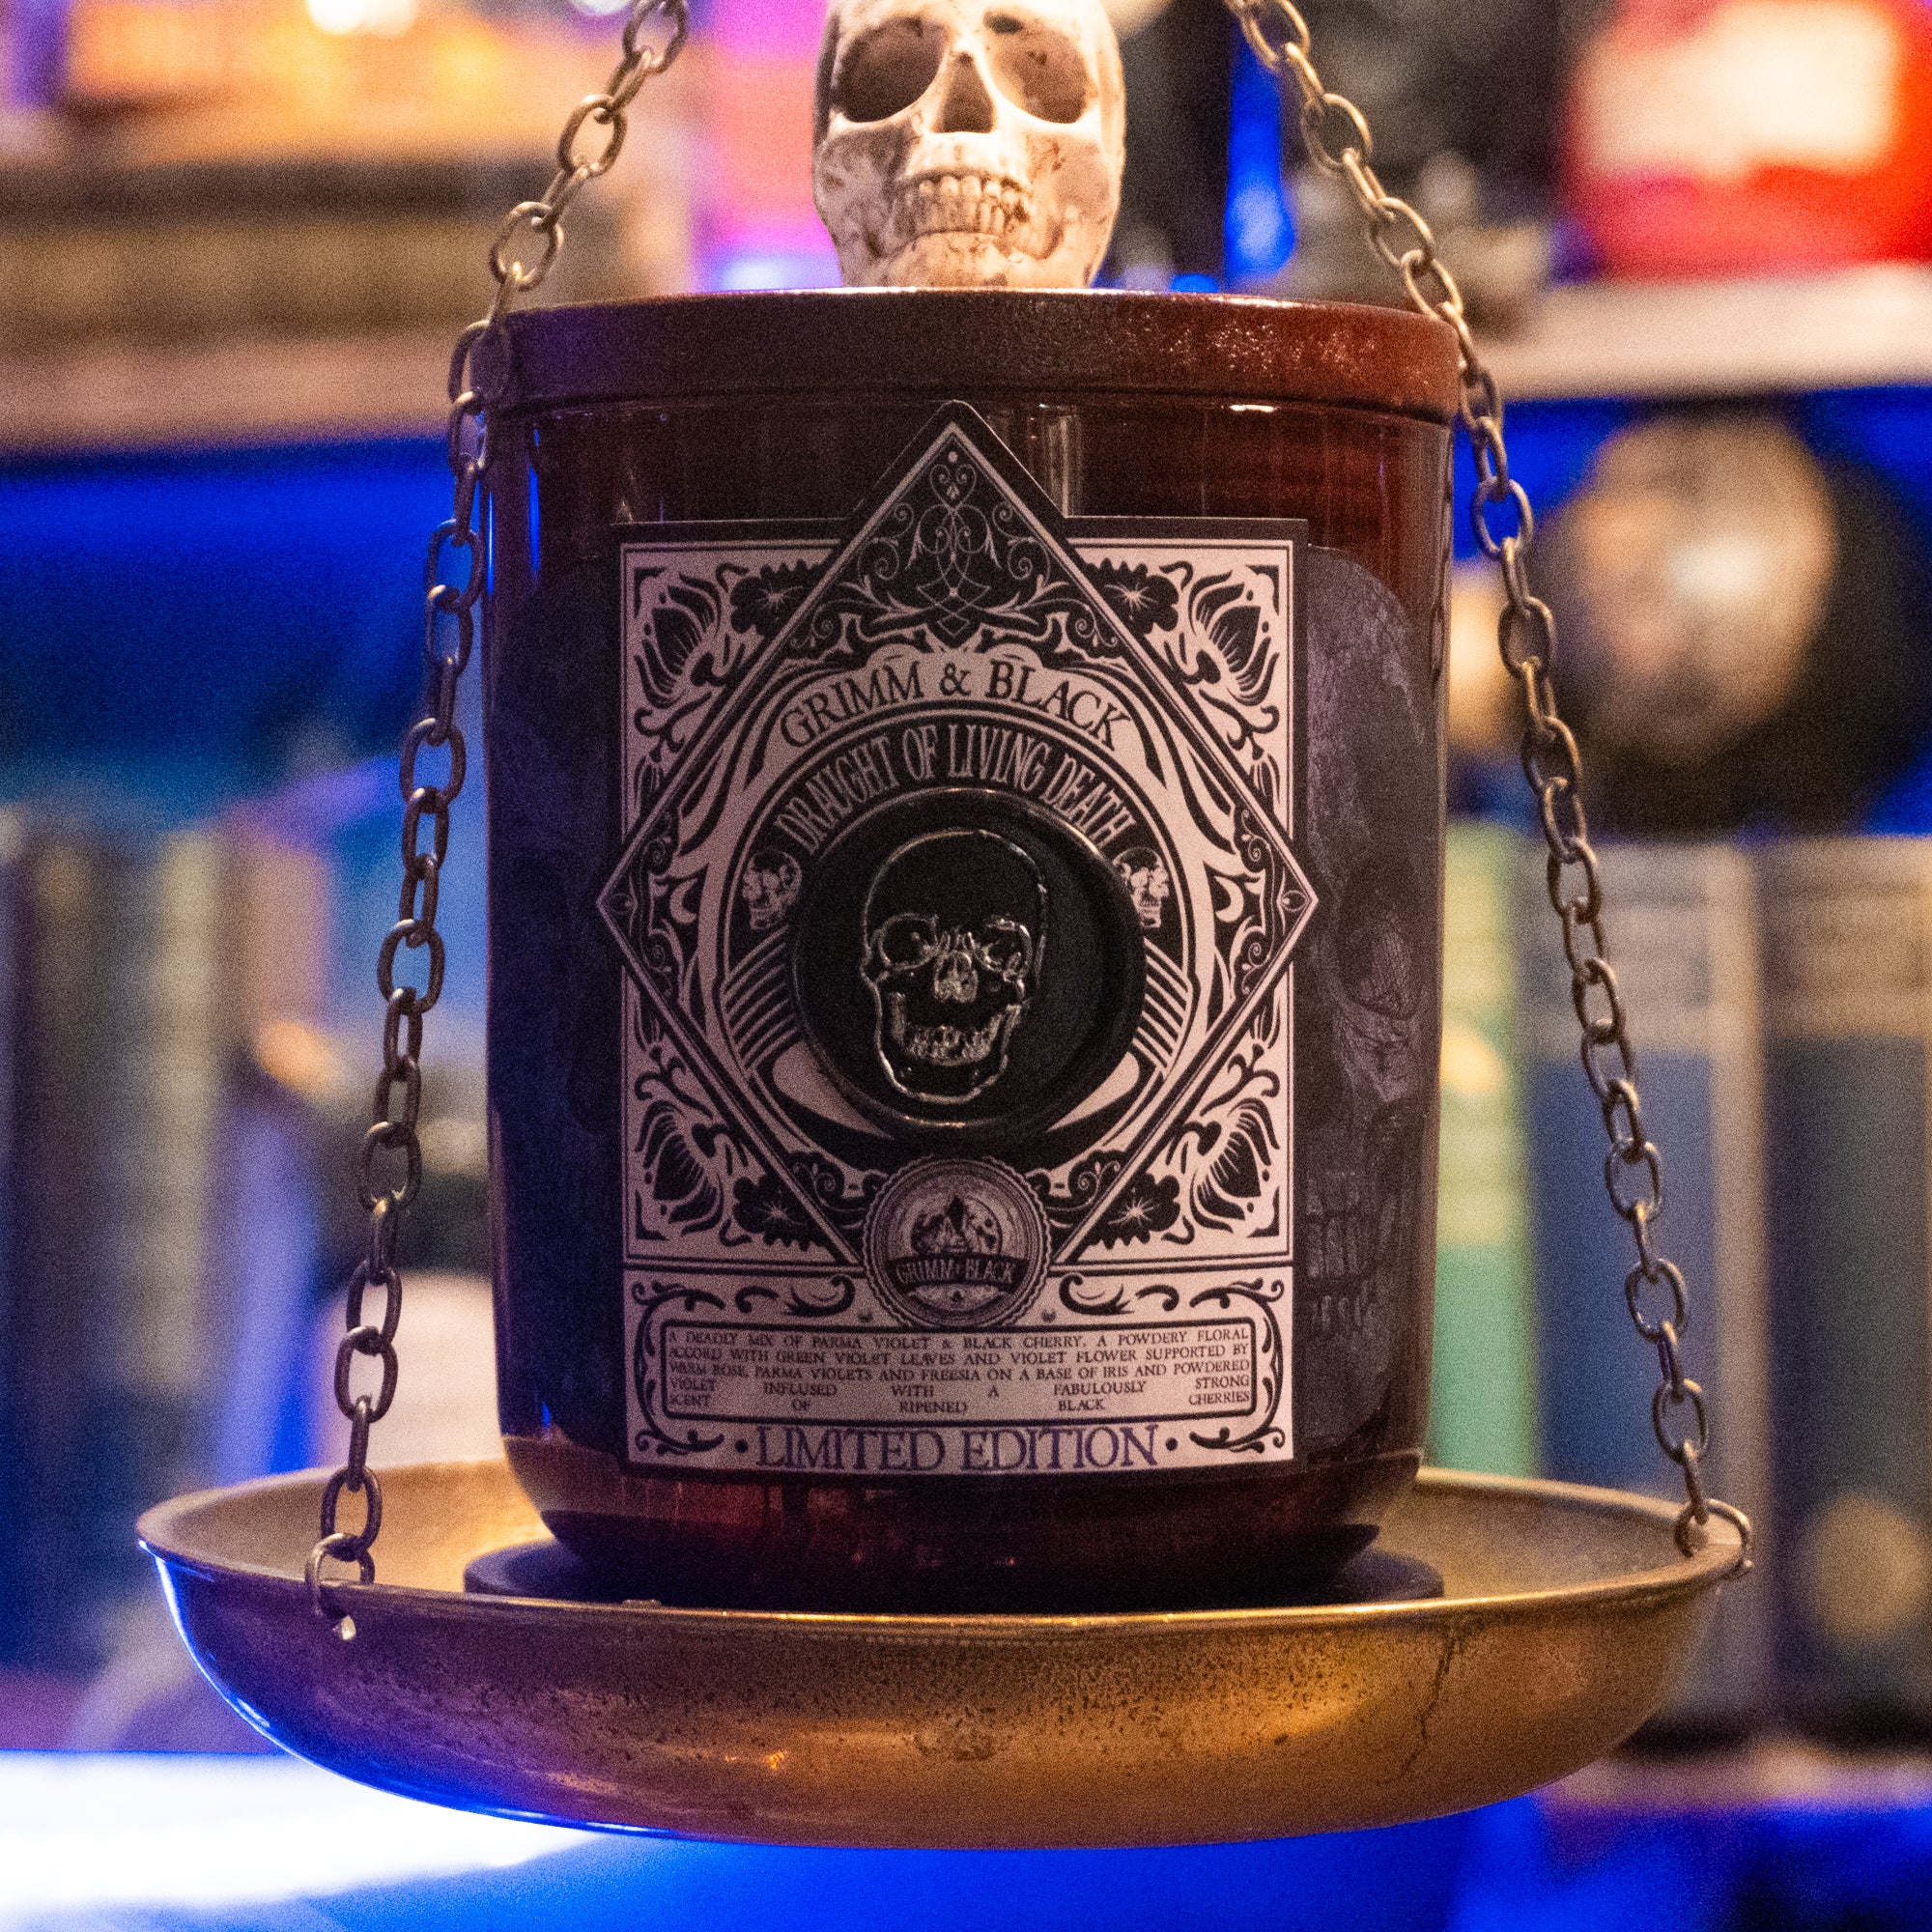 Living Death Candle